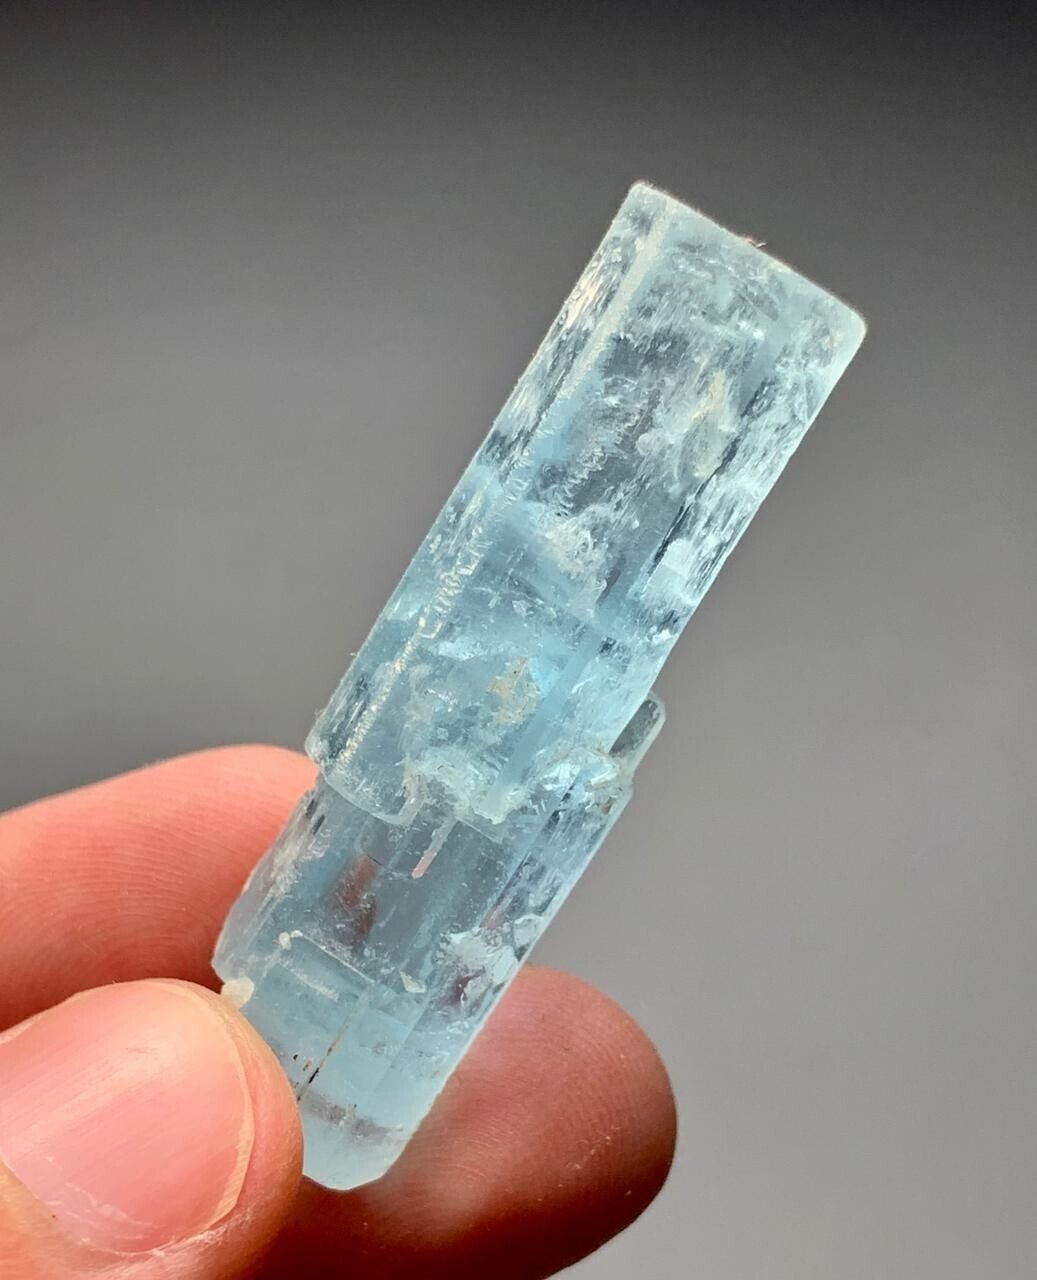 63 Cts Natural Aquamarine Crystal Specimen From Afghanistan